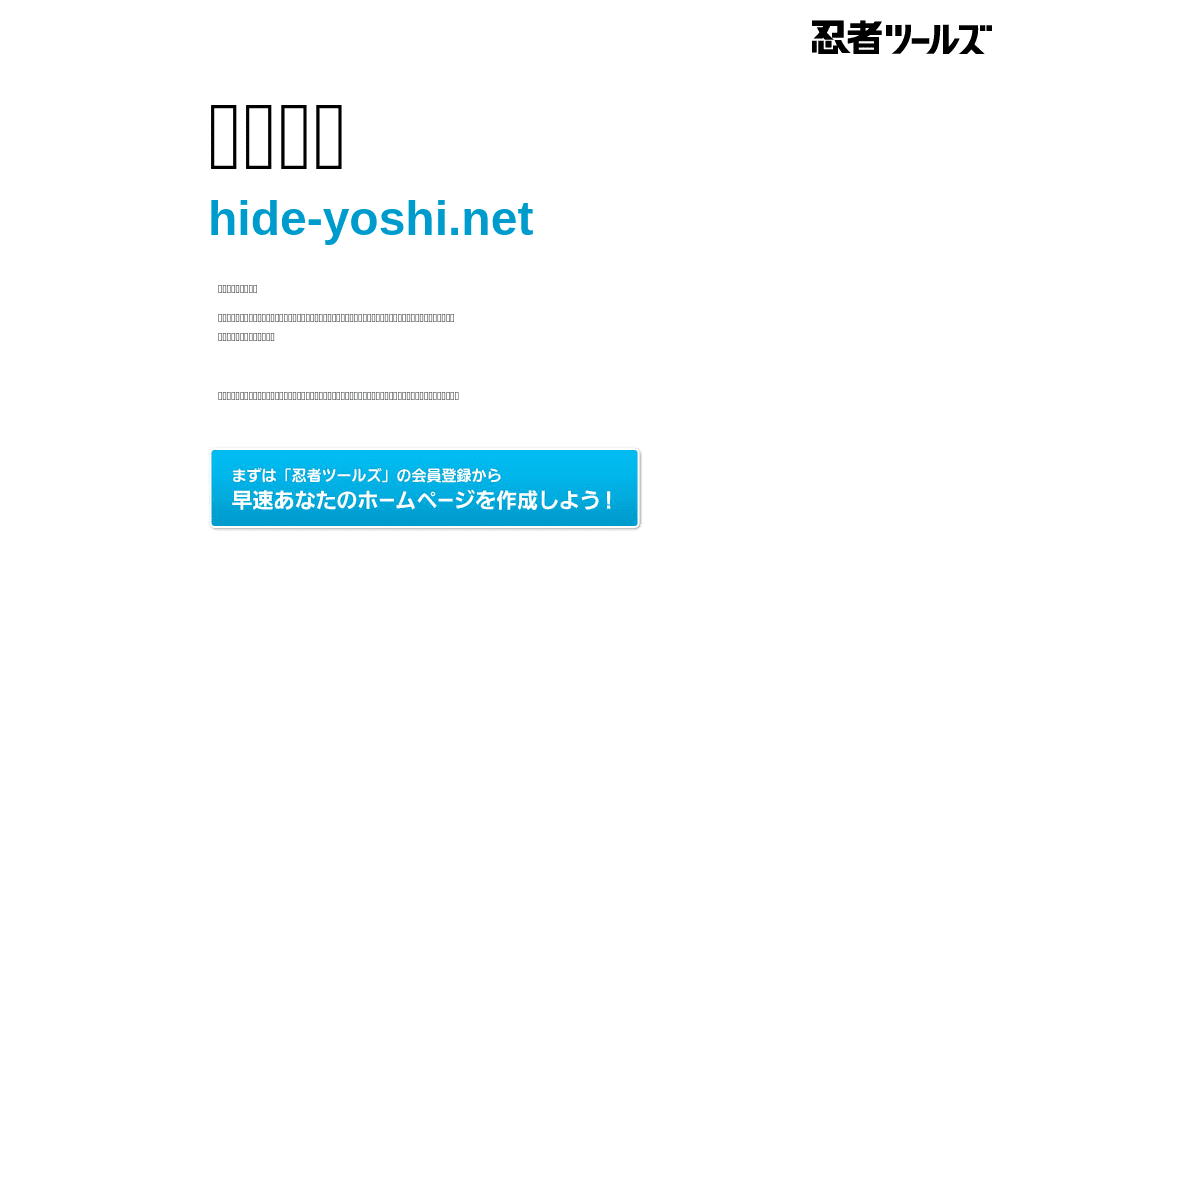 A complete backup of https://hide-yoshi.net